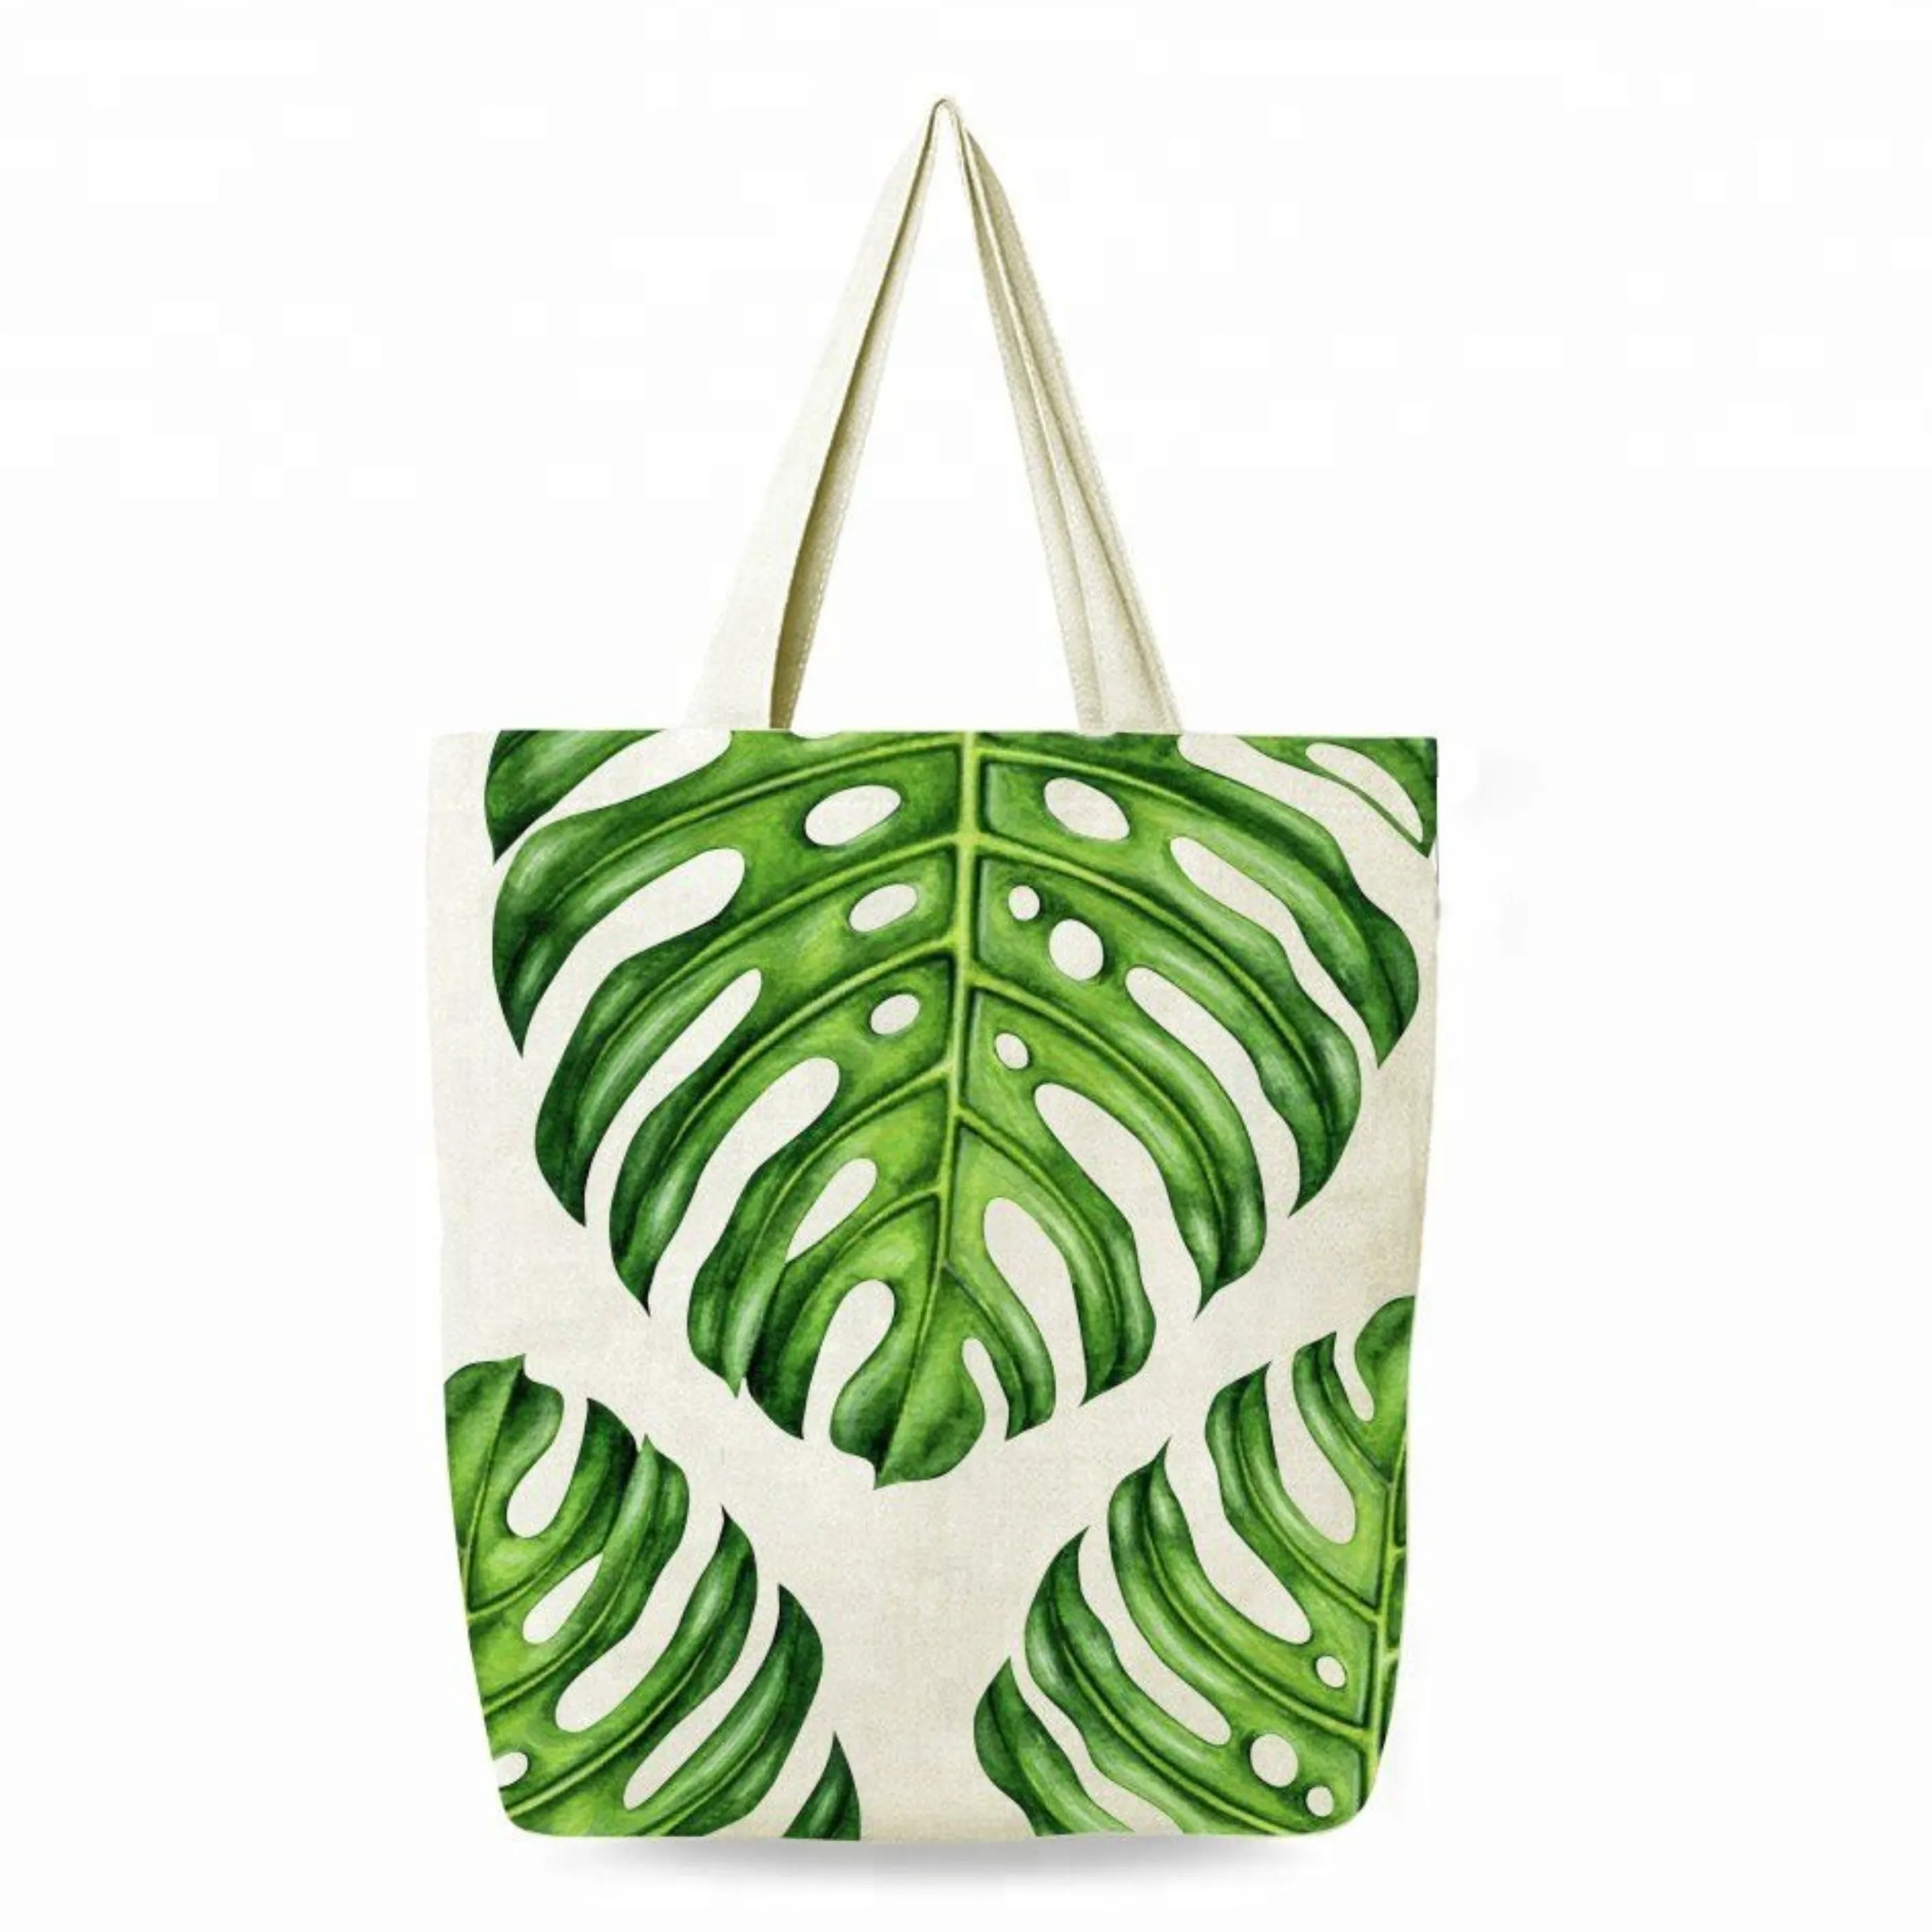 Monster Leaves Green Large Utility Standard Size Canvas Cotton Tote Bag